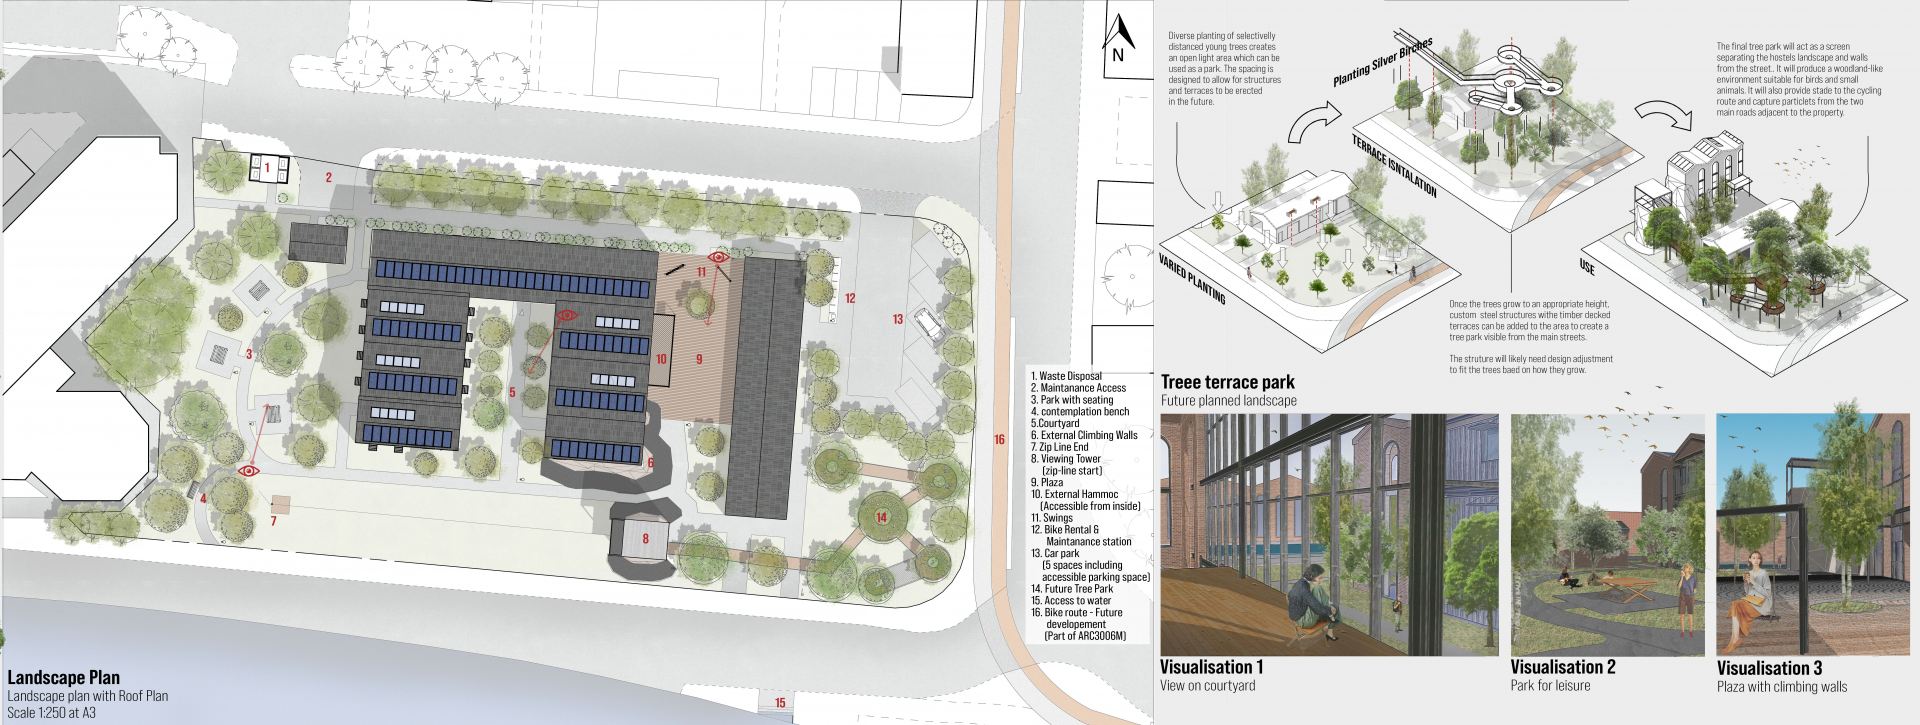 Plan of the landscape presenting its varied planting along side waste area, plaza, tree park and finally the roof plan. The plan for future tree park and final visualisation are provided.